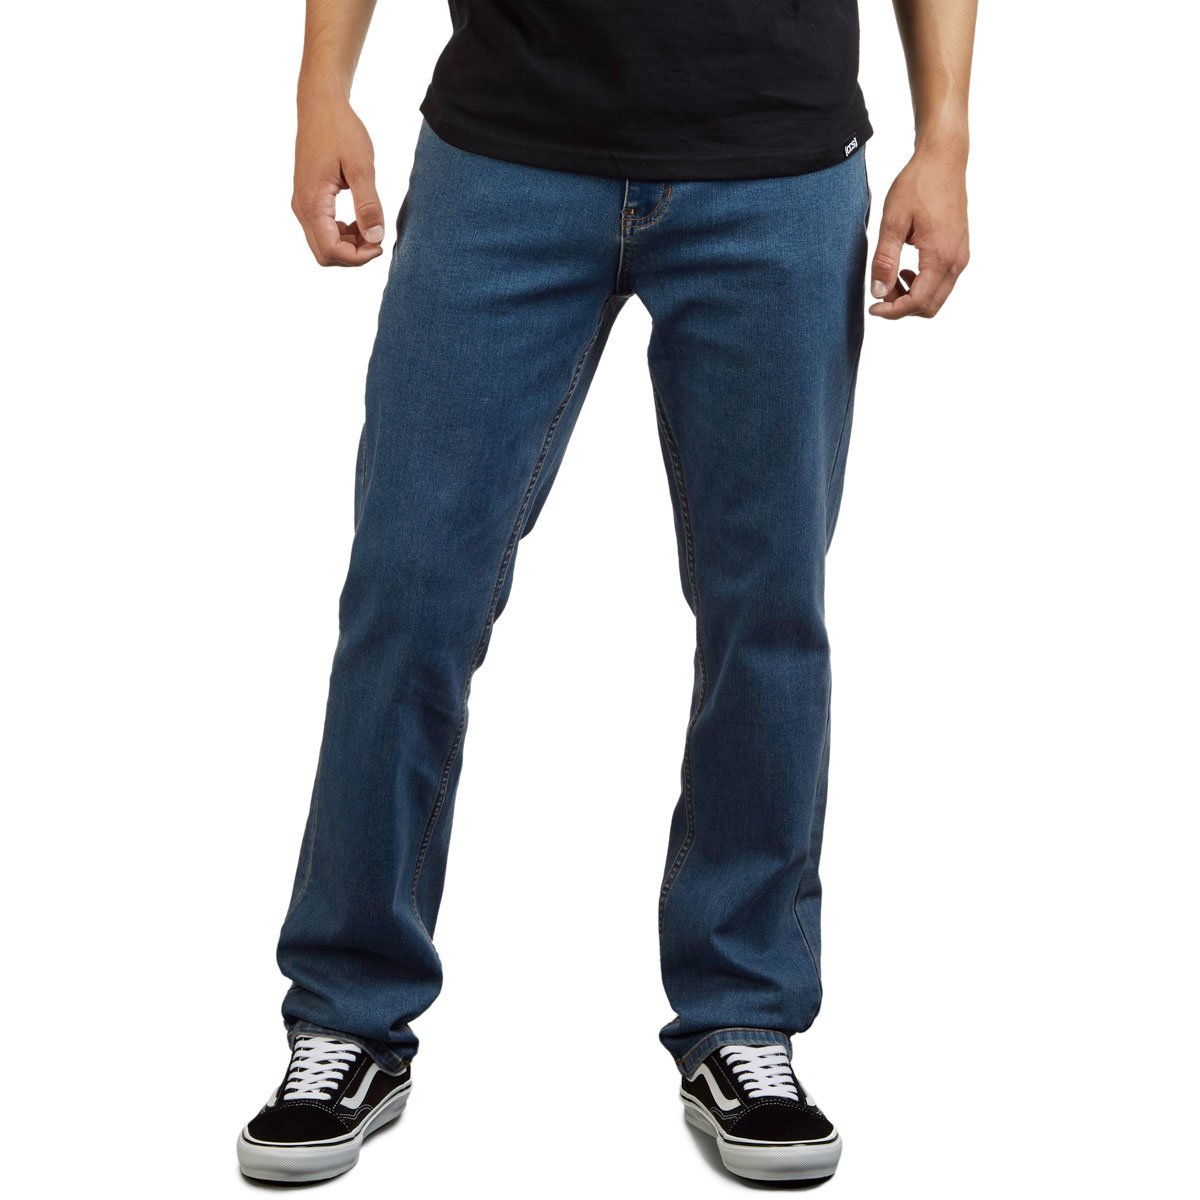 CCS Standard Plus Relaxed Denim Jeans - New Rinse image 1